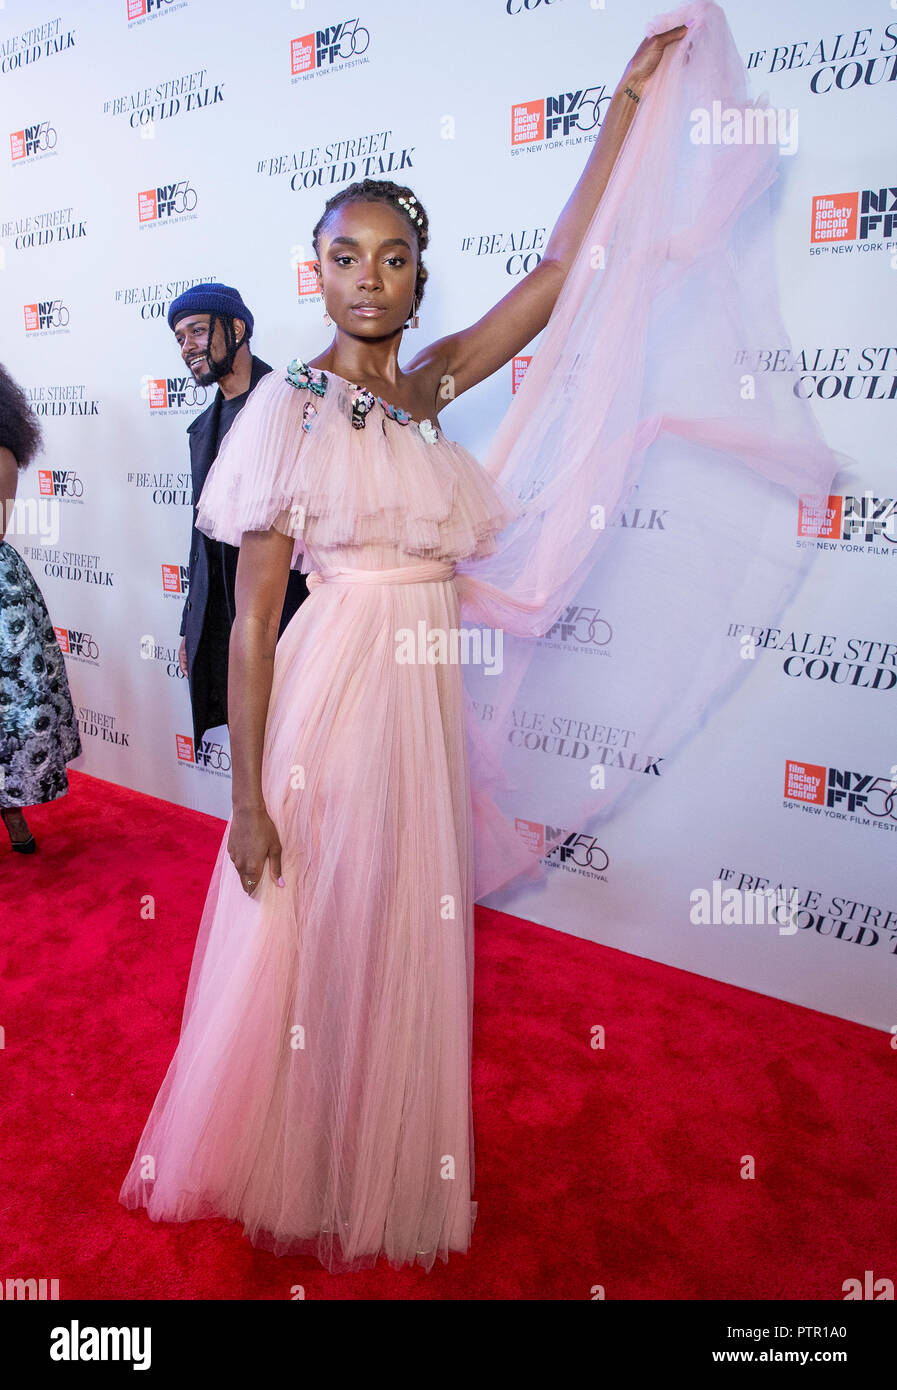 New York, United States. 09th Oct, 2018. Kiki Layne wearing dress by  Valentino attends premiere of If Beale Street Could Talk during the 56th  New York Film Festival at The Apollo Theater